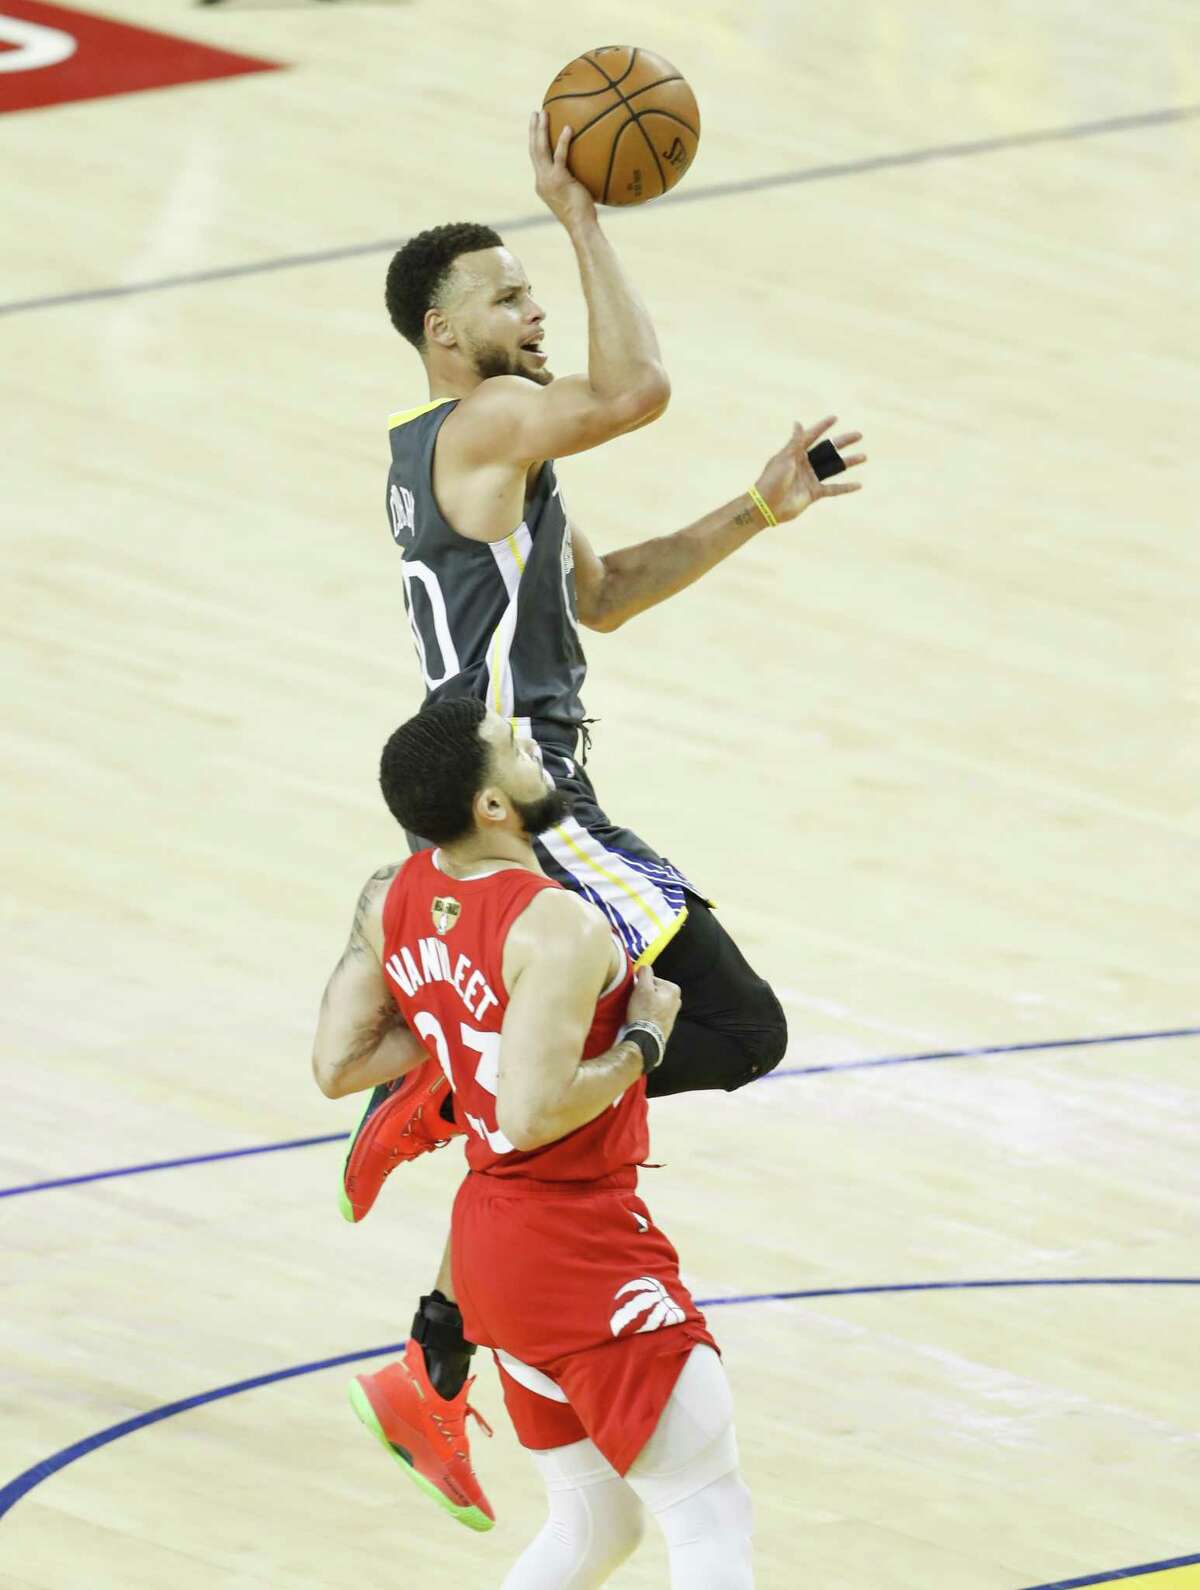 Golden State Warriors’ Stephen Curry shoots over Toronto Raptors’ Fred VanVleet in the third quarter during game 6 of the NBA Finals between the Golden State Warriors and the Toronto Raptors at Oracle Arena on Thursday, June 13, 2019 in Oakland, Calif.